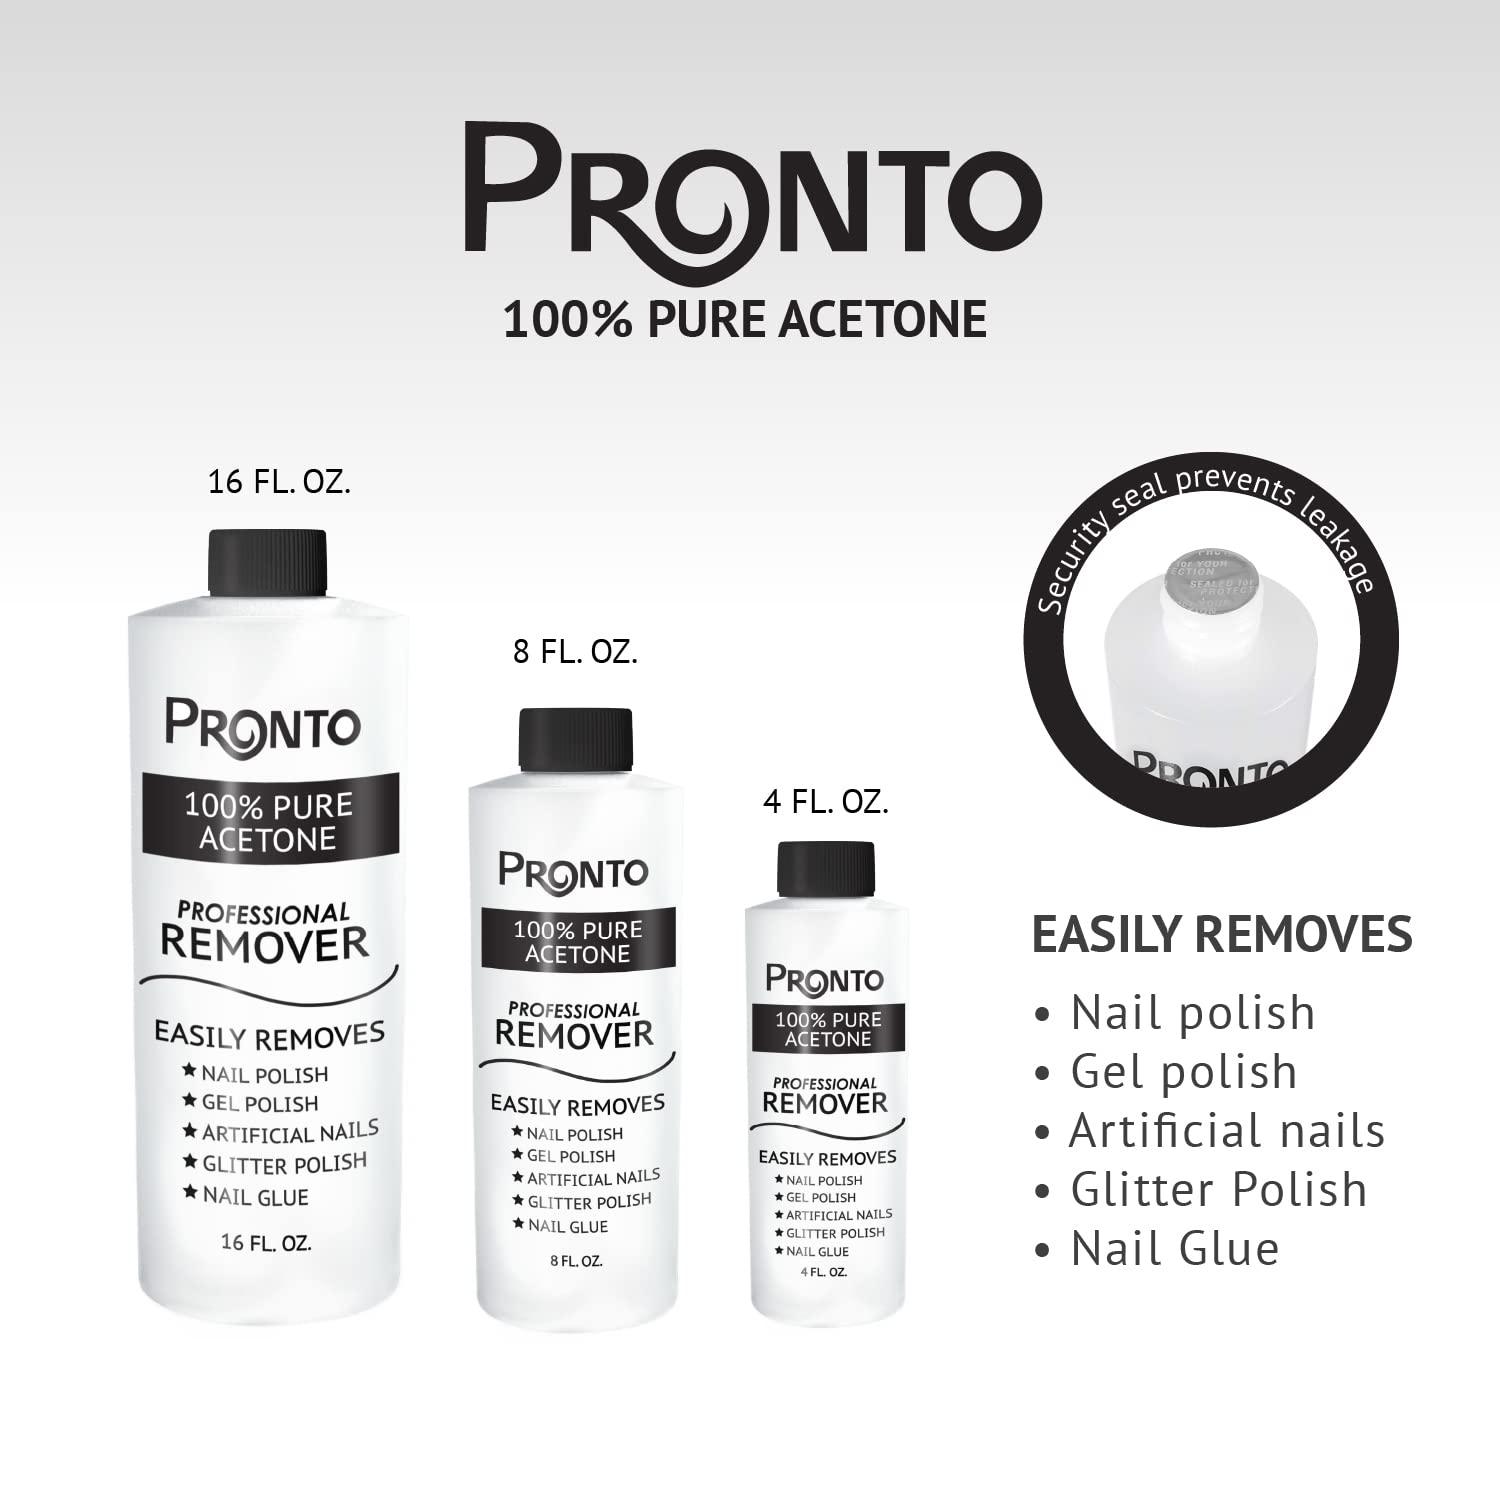 Pronto 100% Pure Acetone - Quick Professional Nail Polish Remover For  Natural, Gel, Acrylic, Sculptured Nails - 8 Fl Oz ea. (Pack of 2) 8 Fl Oz  (Pack of 2)